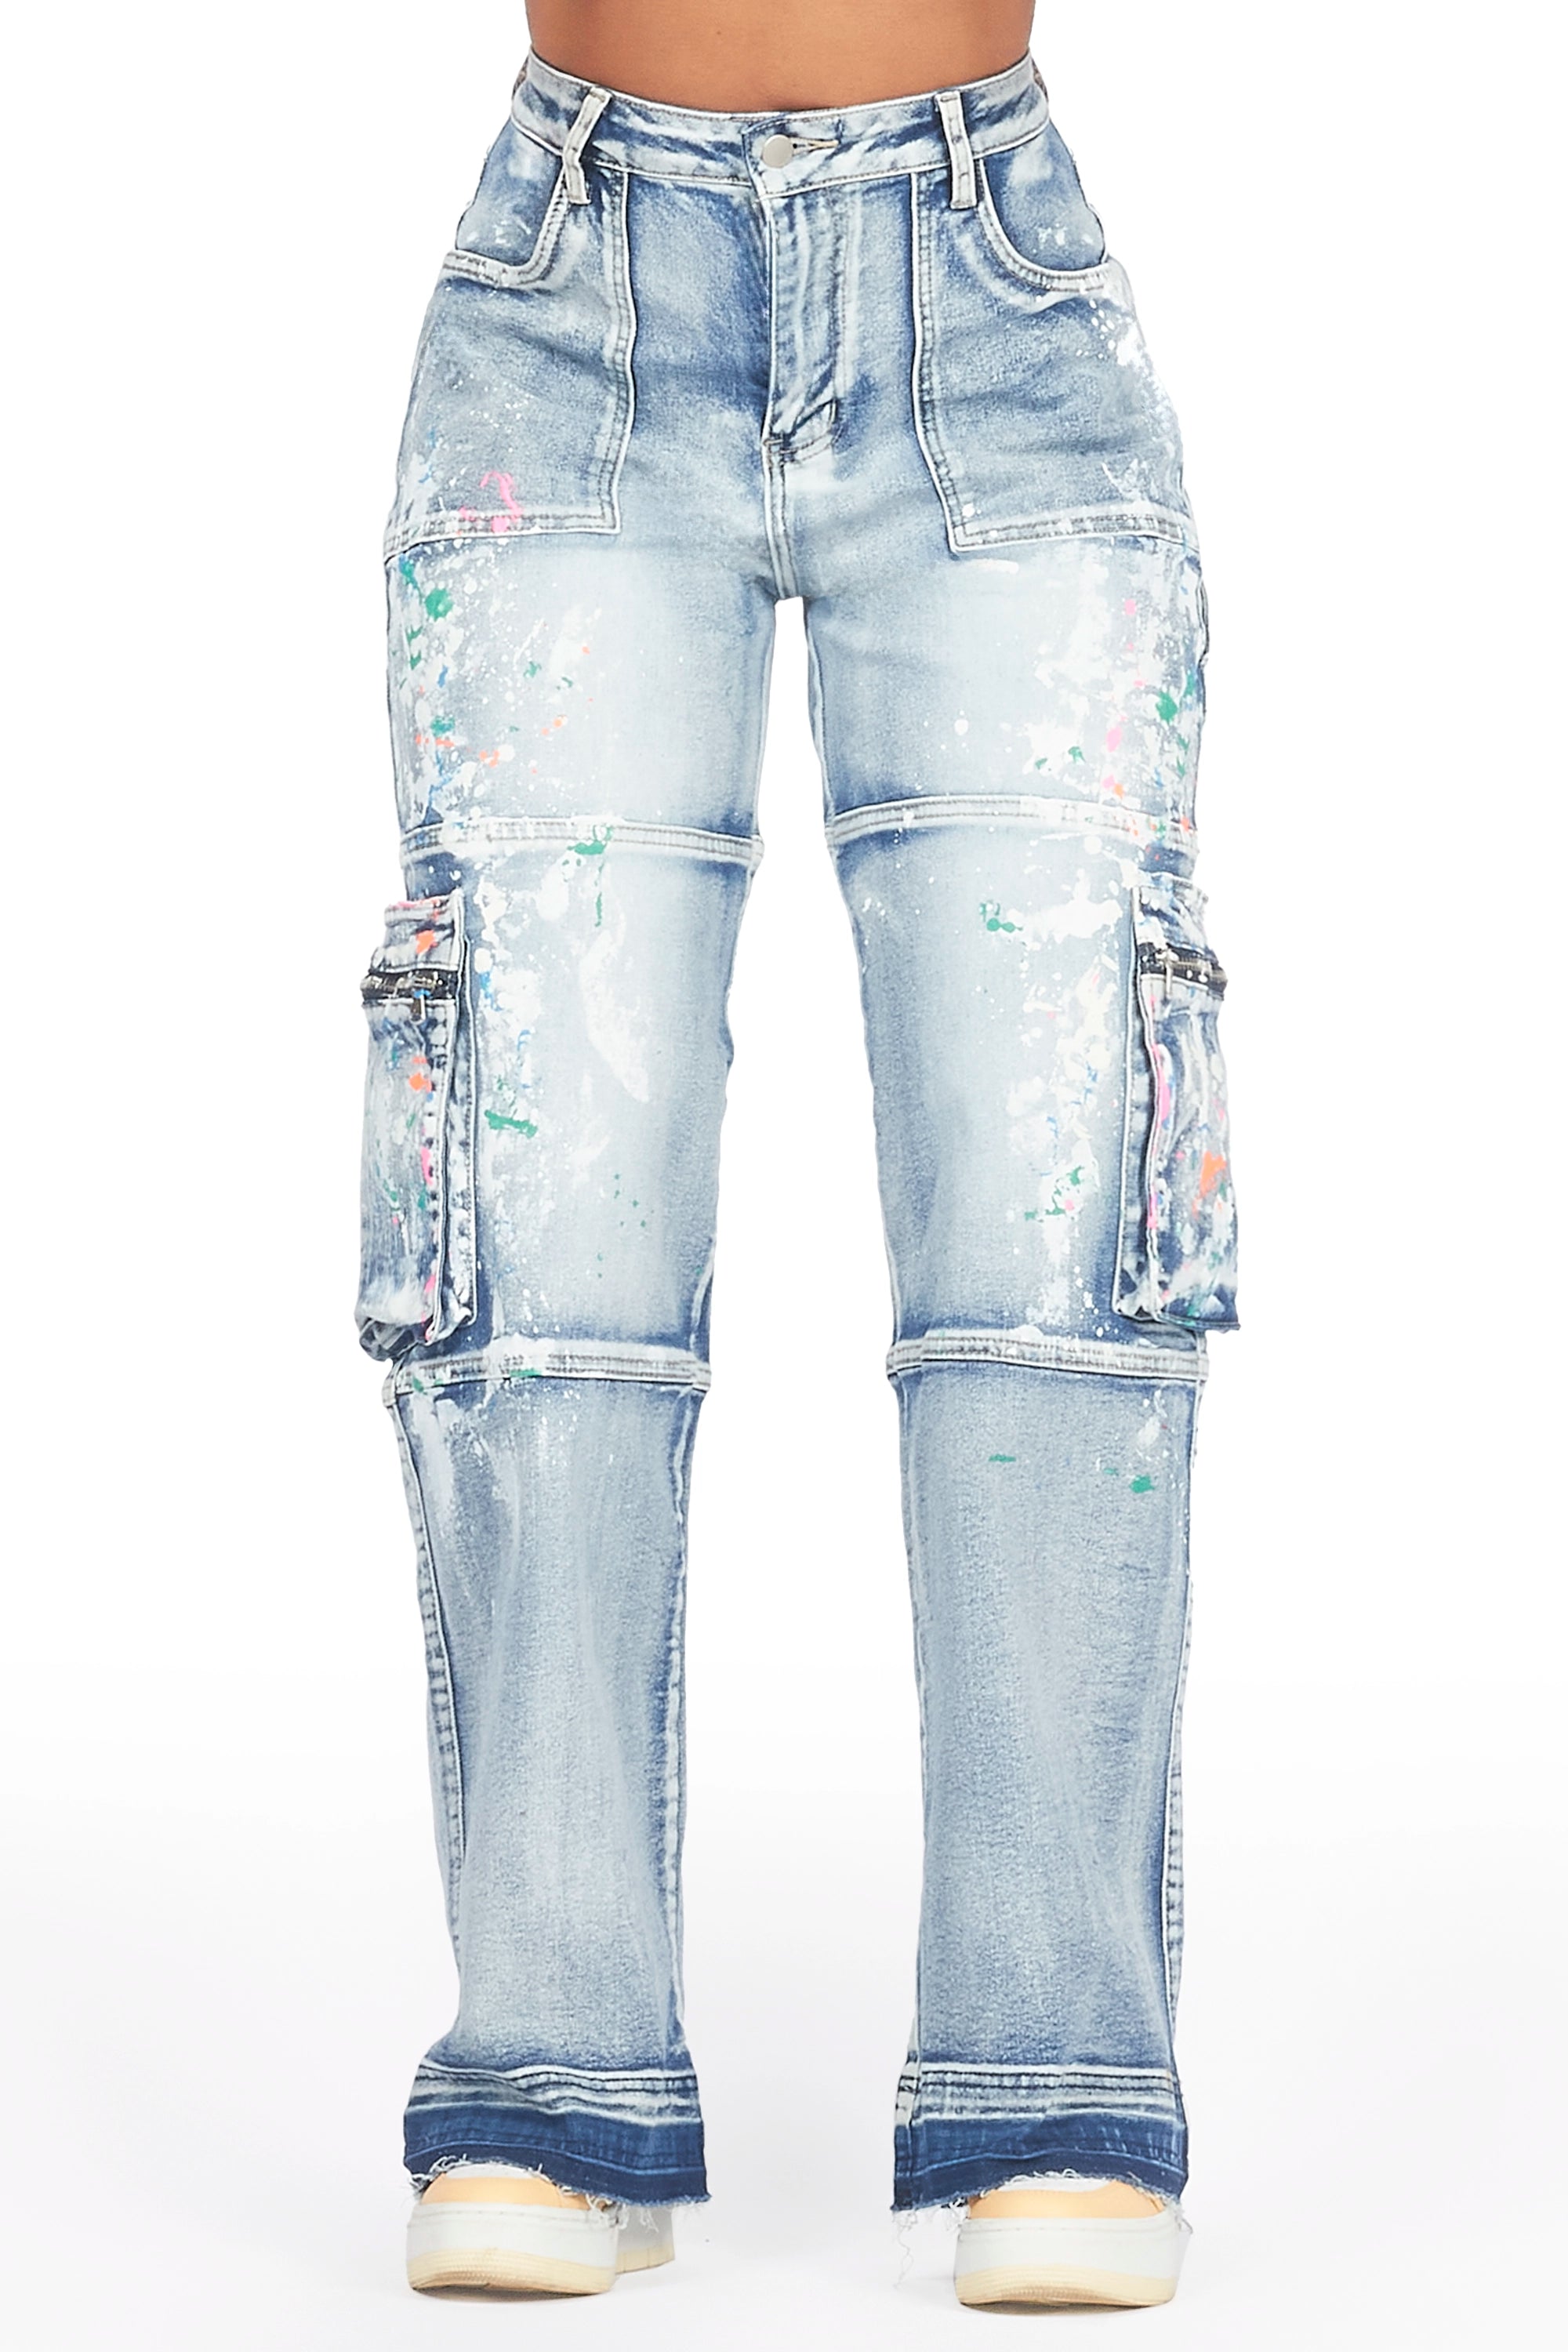 Dionna Med. Wash Painted Wide Leg Jean